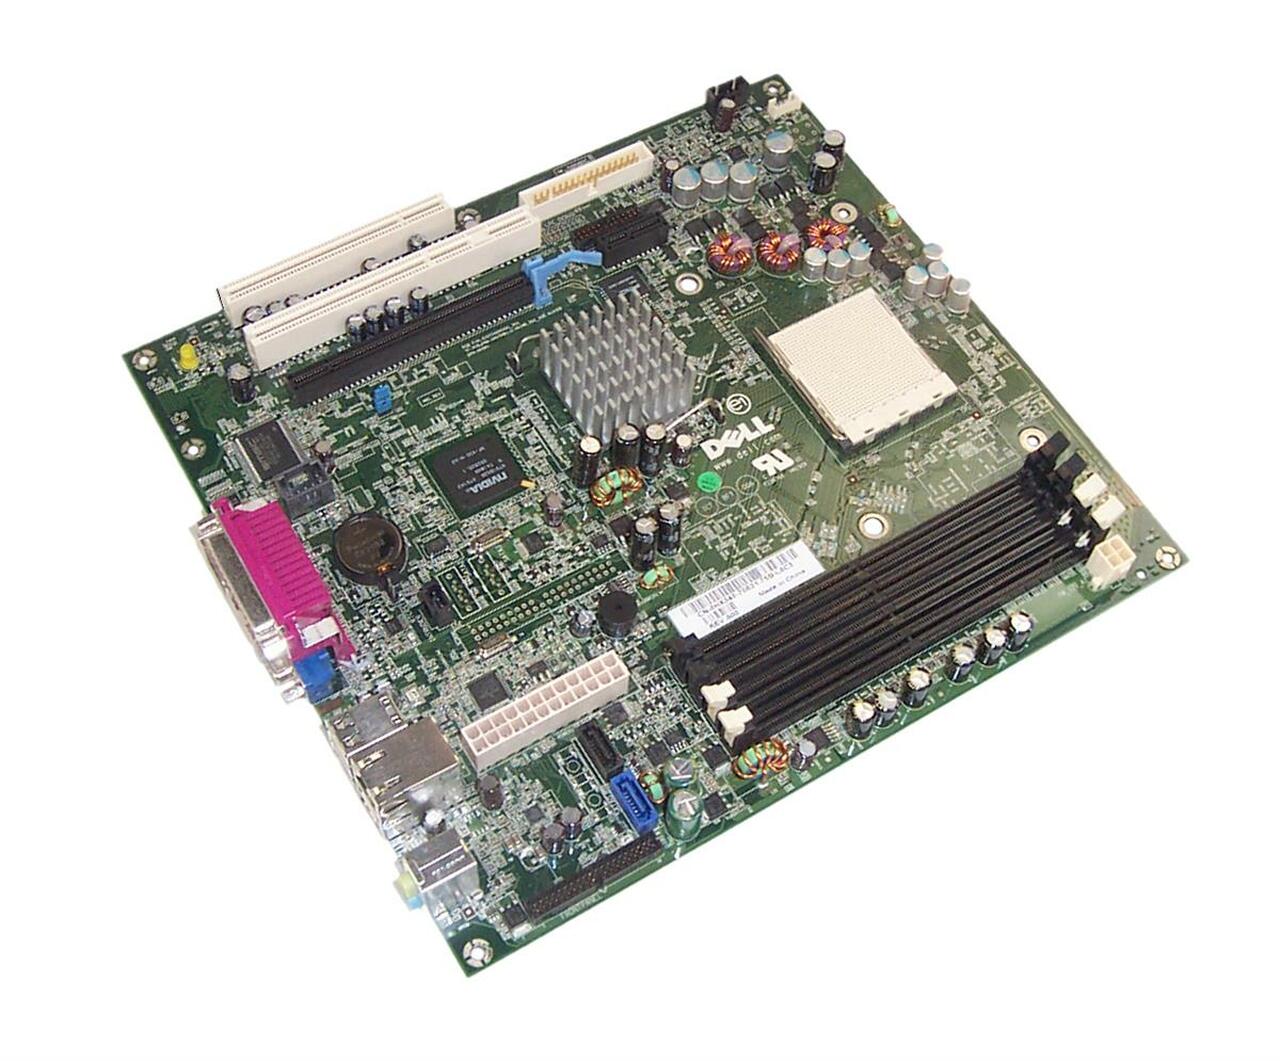 Motherboard for PC Dell Model Optiplex Gx270 Branded Used